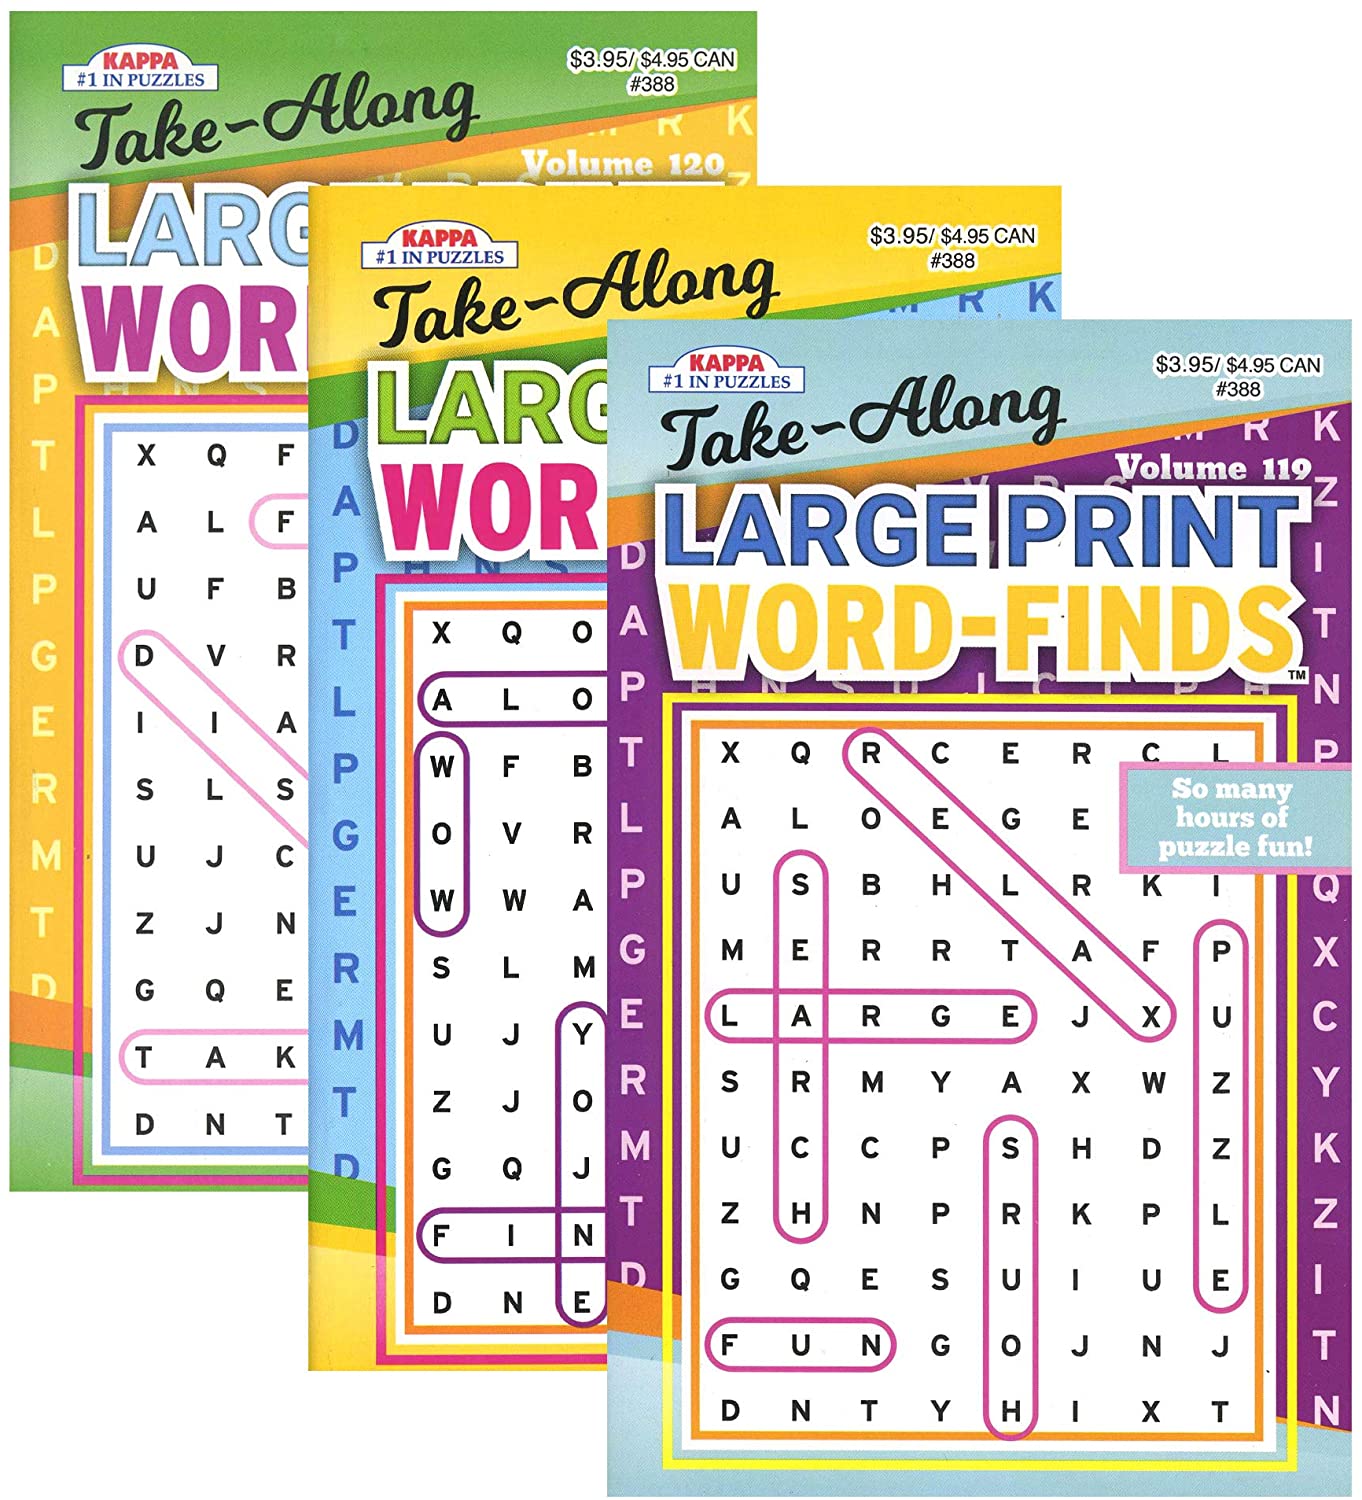 KAPPA Take Along Large Print Word Finds Puzzle Book | Digest Size 3-Titles.